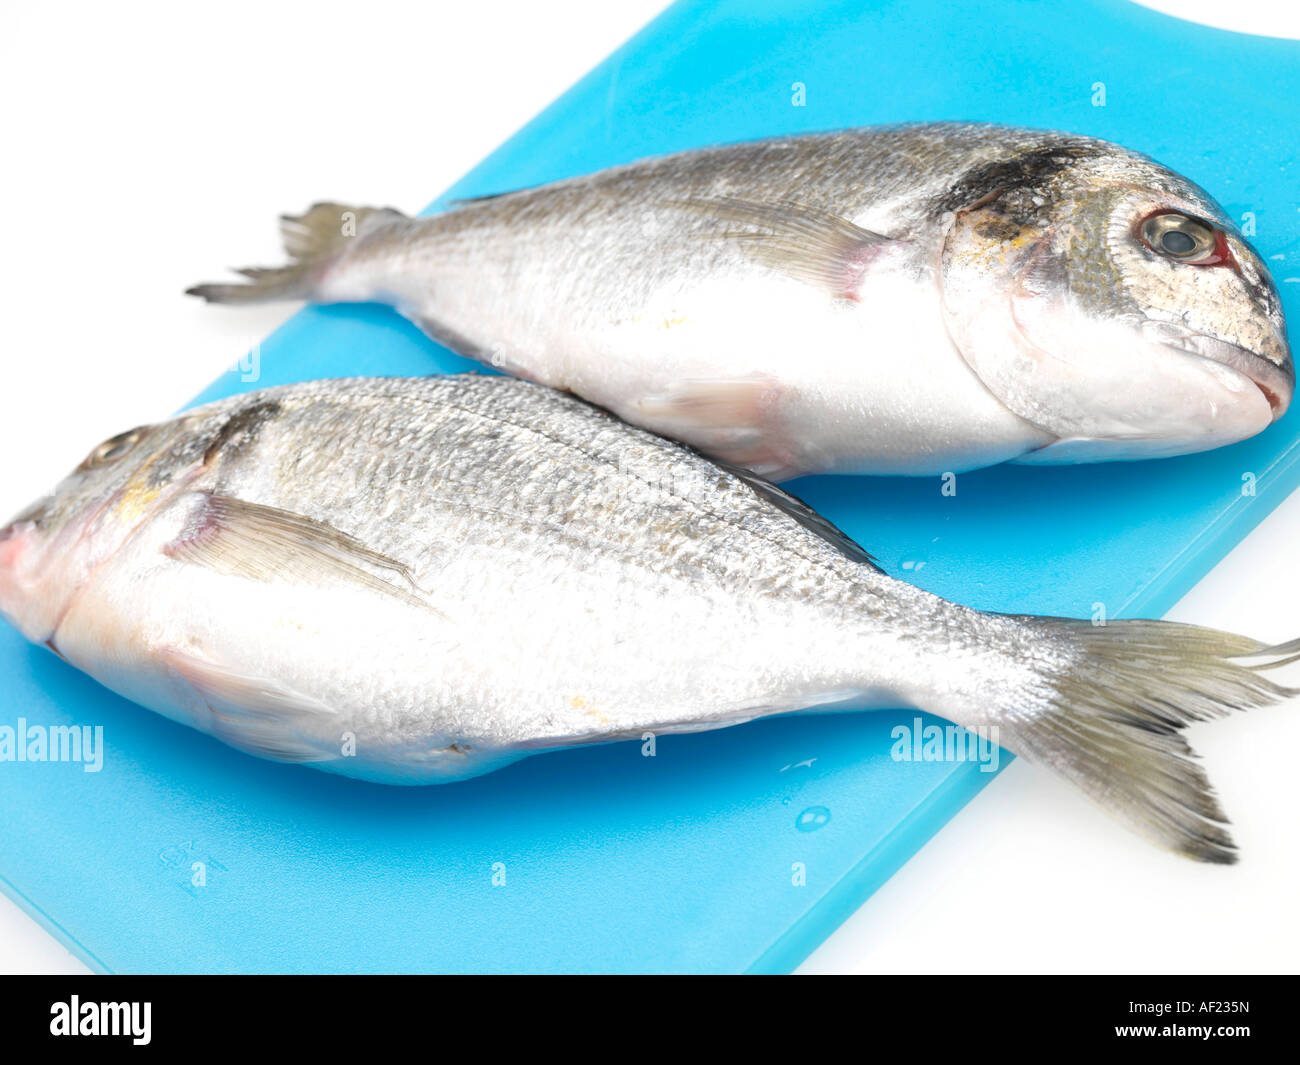 Healthy Fresh Uncooked Whole Sea Bream Fish With No People Stock Photo